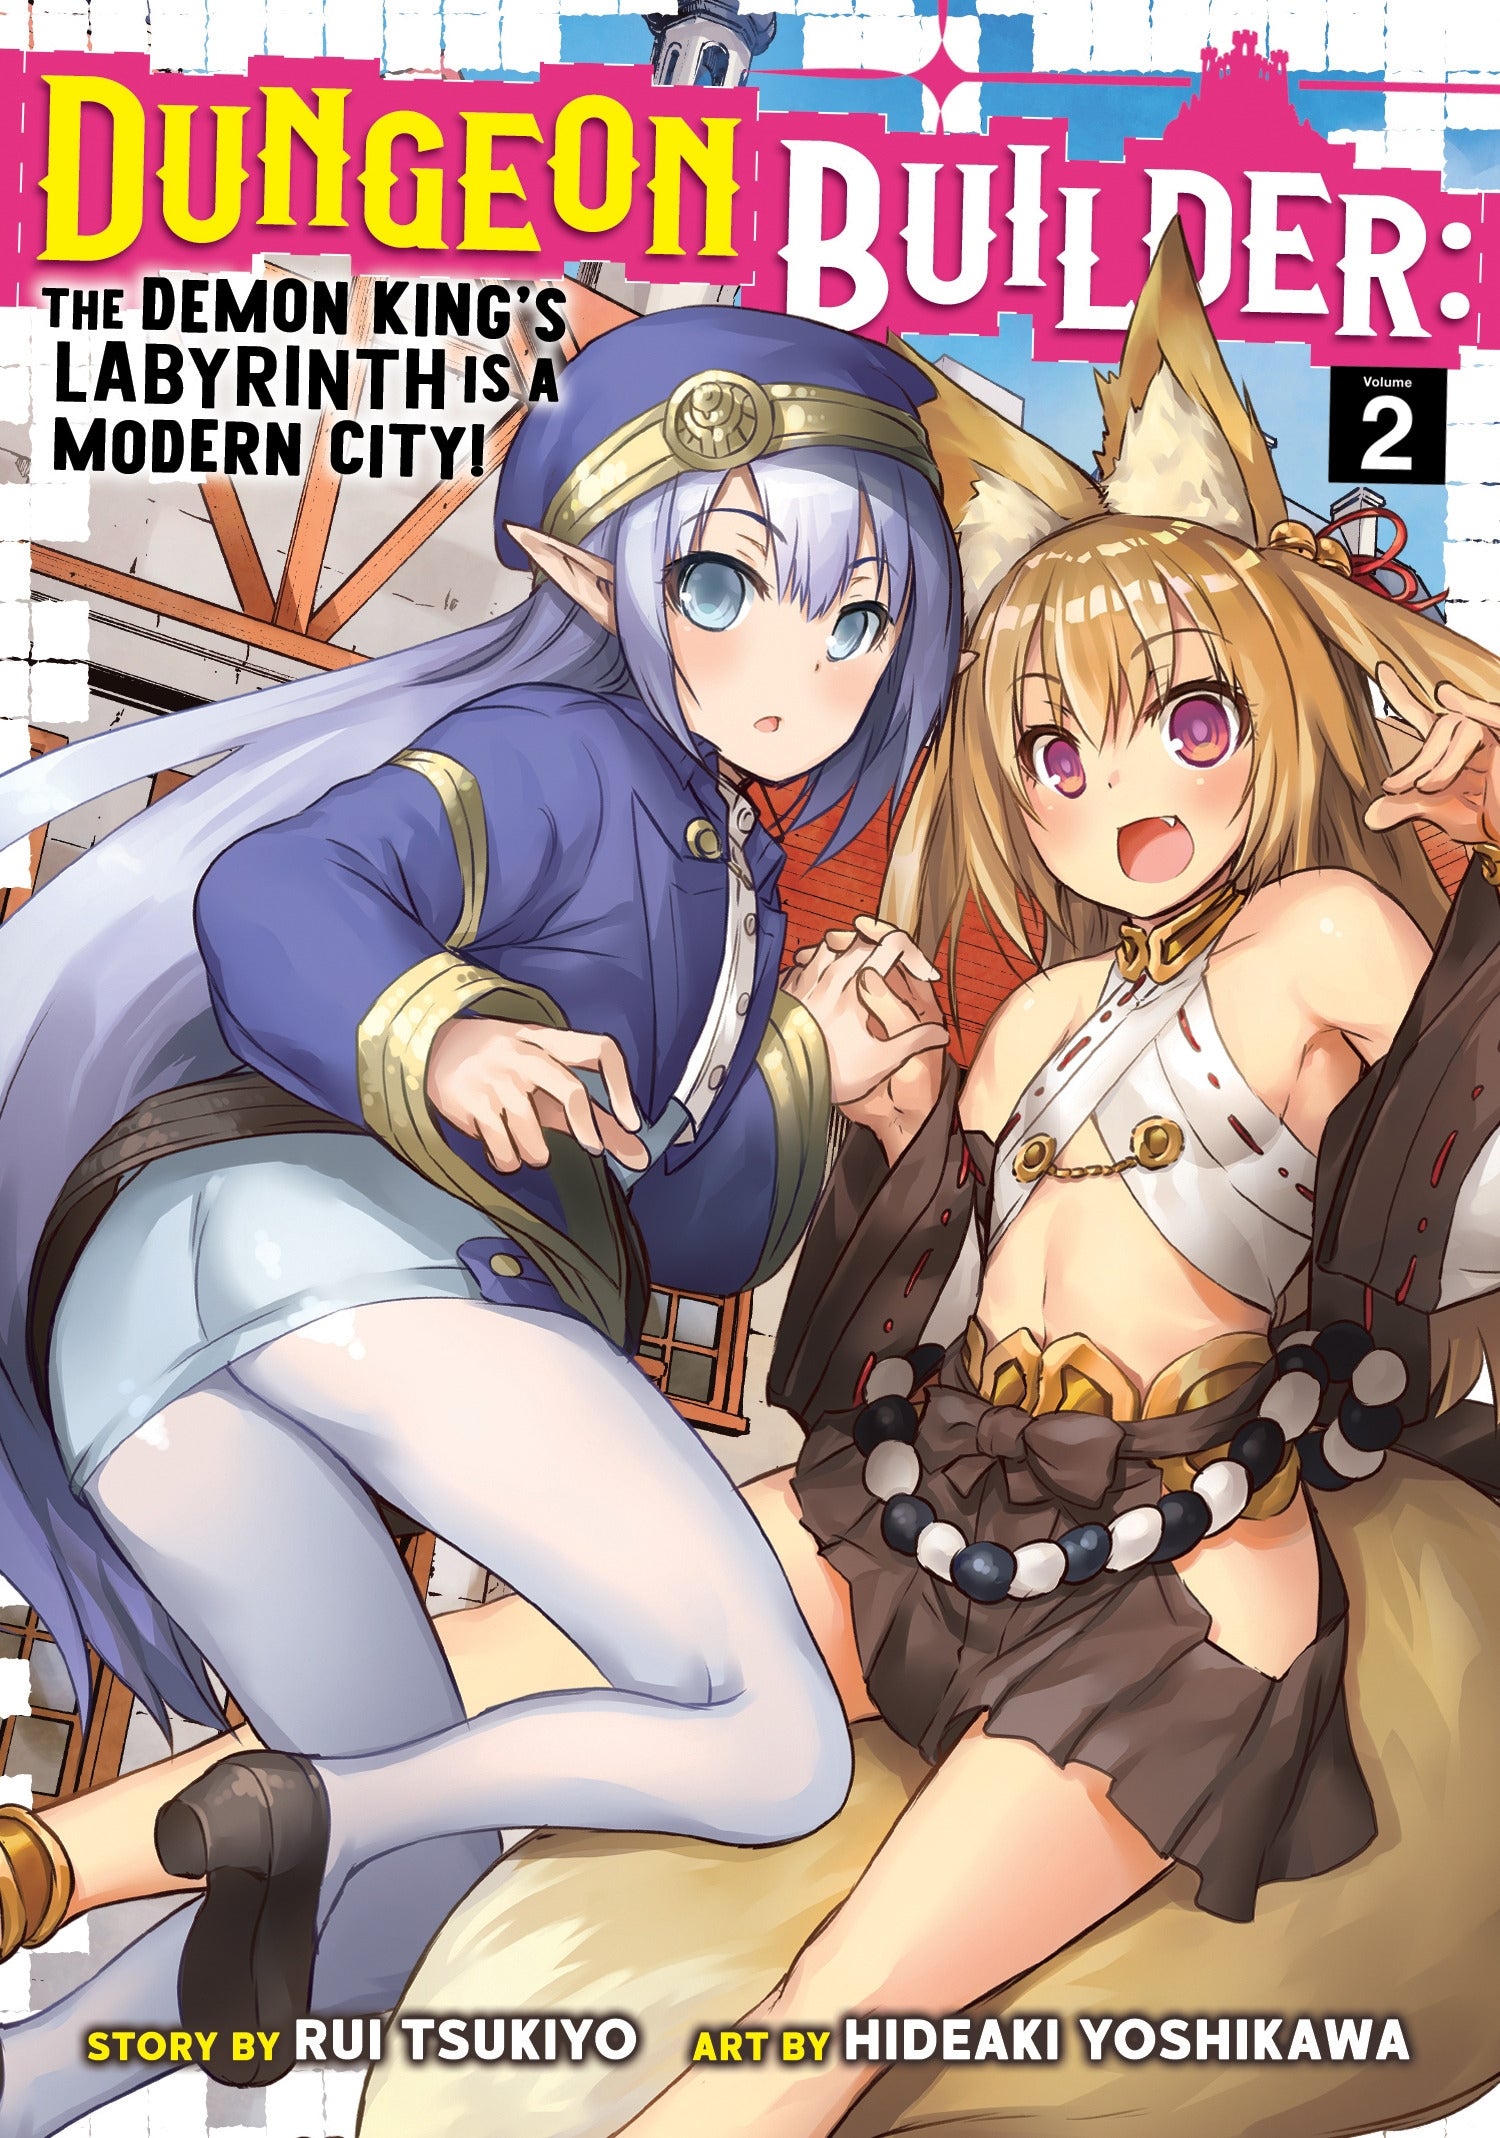 Dungeon Builder The Demon King's Labyrinth is a Modern City! (Manga) Vol. 2